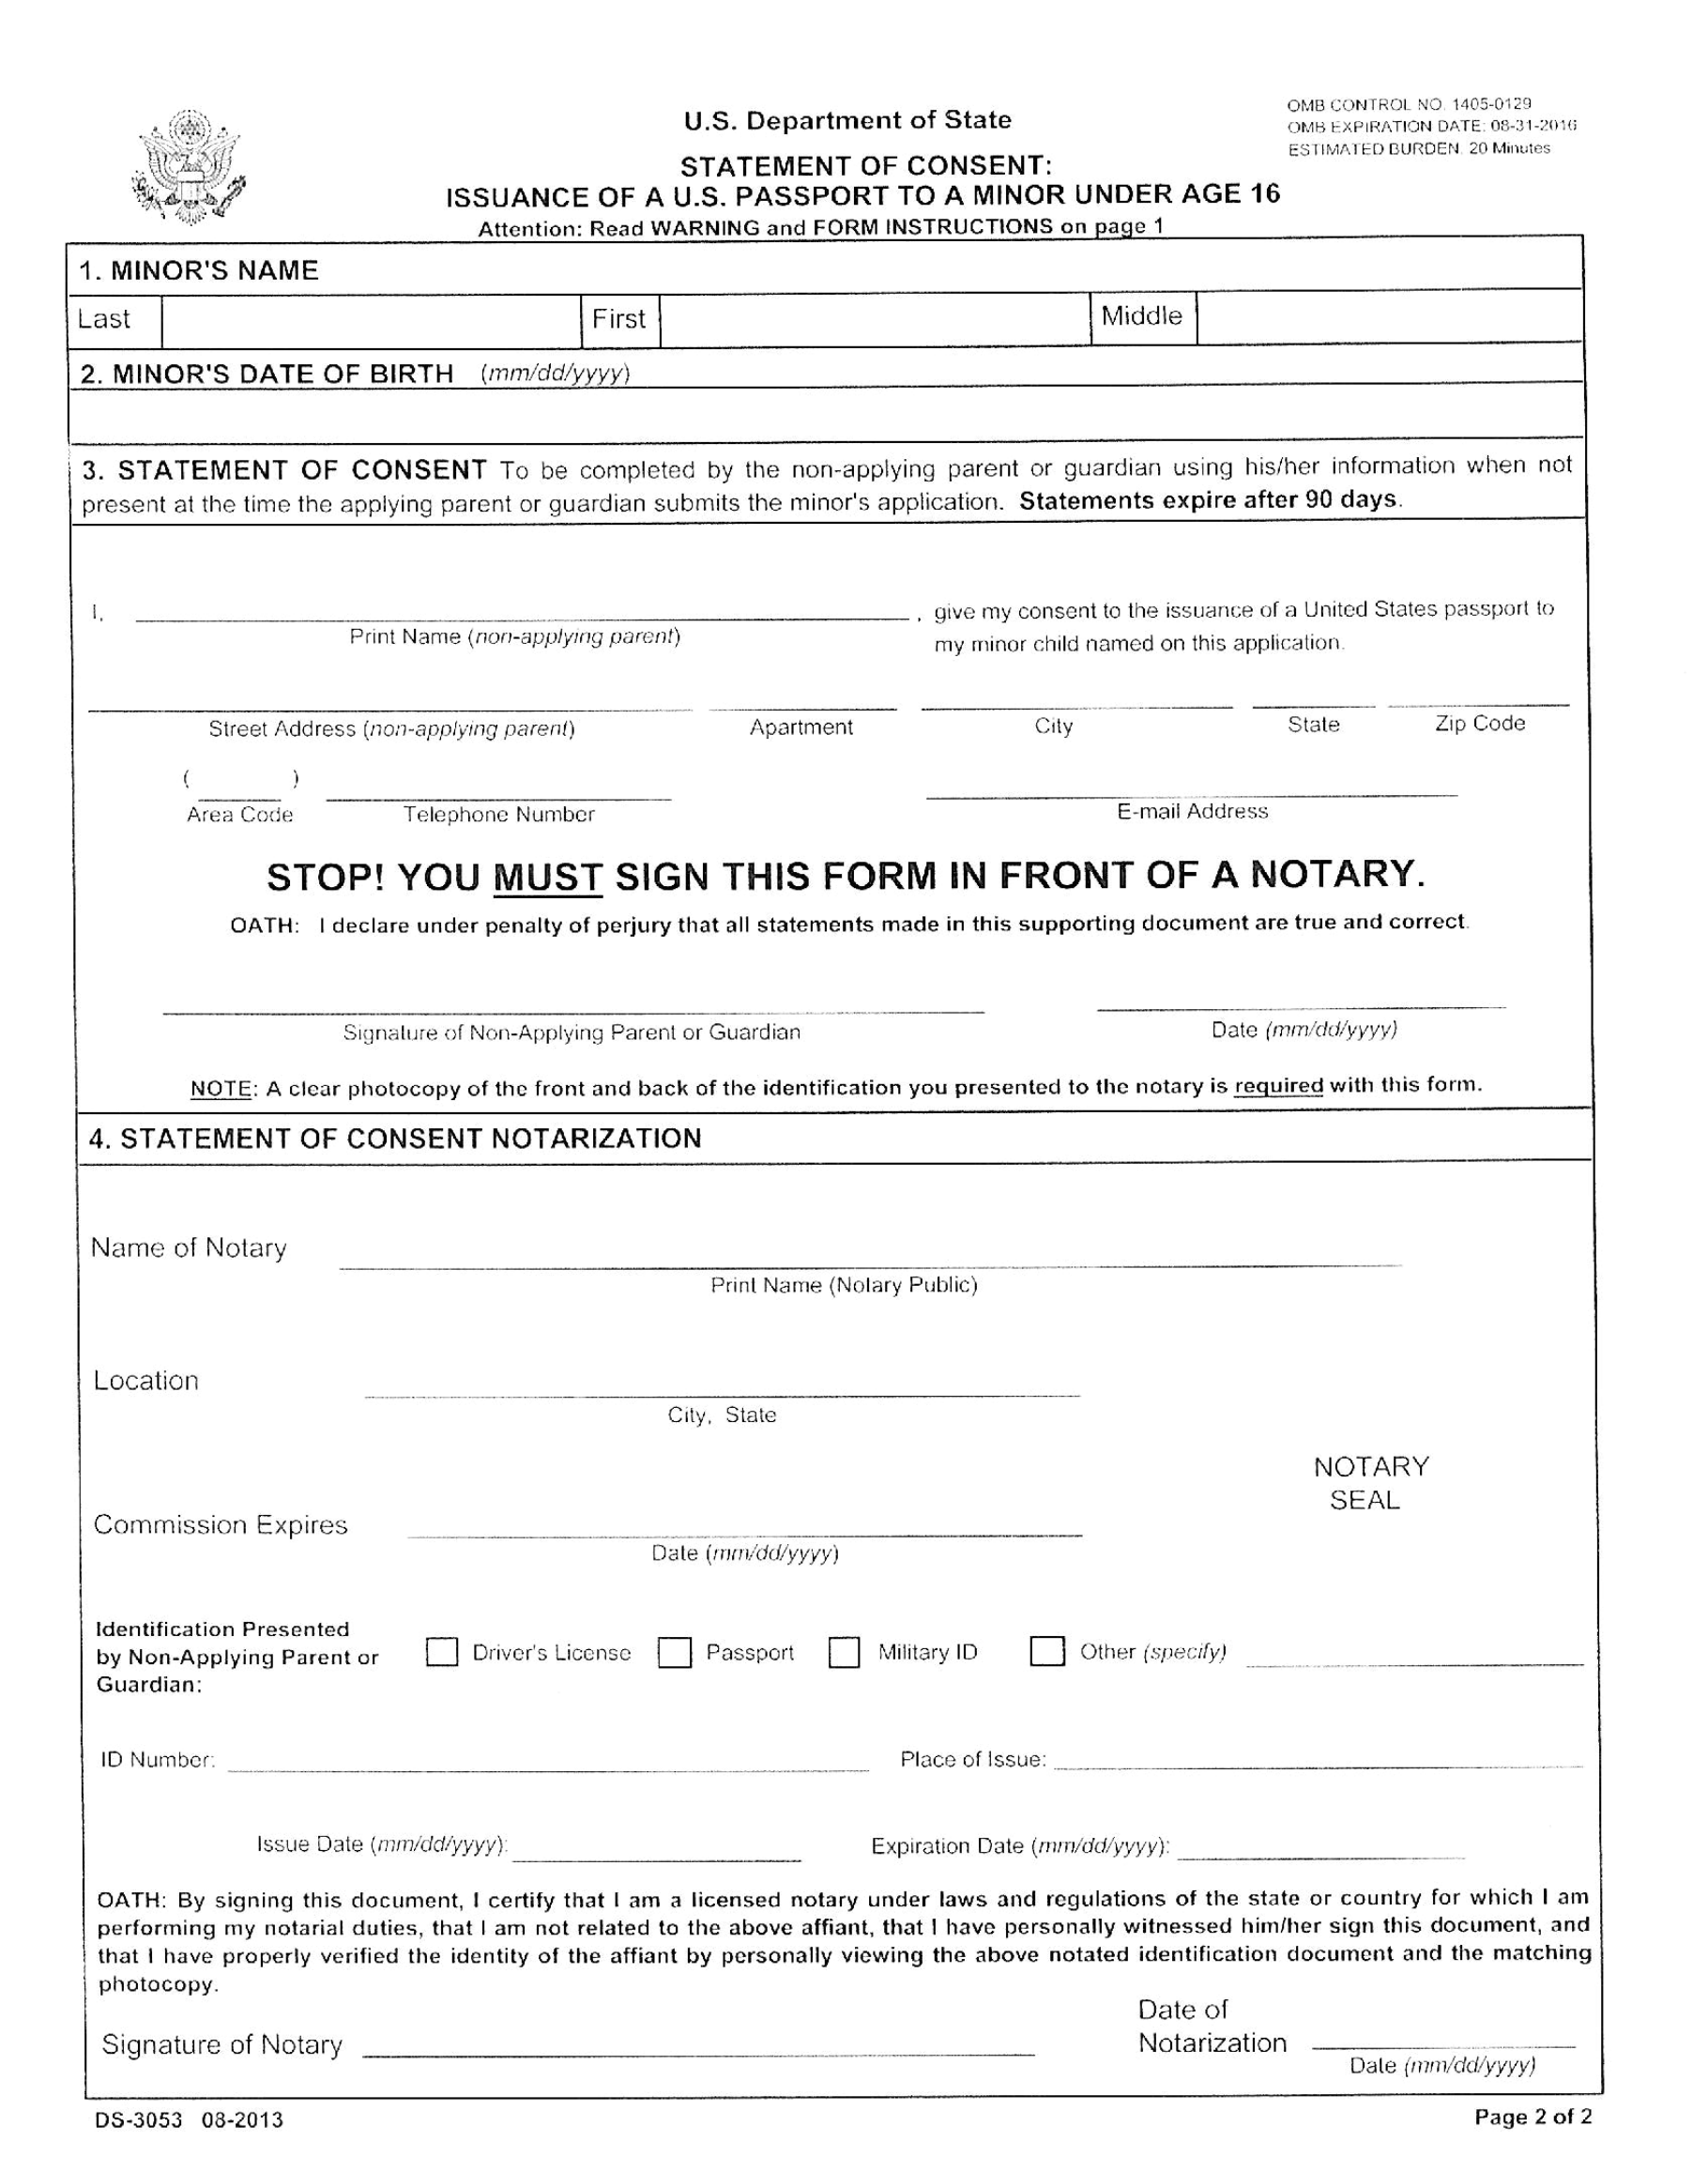 Statement Of Consent Issuance Of A Us Passport To A Minor Under Age